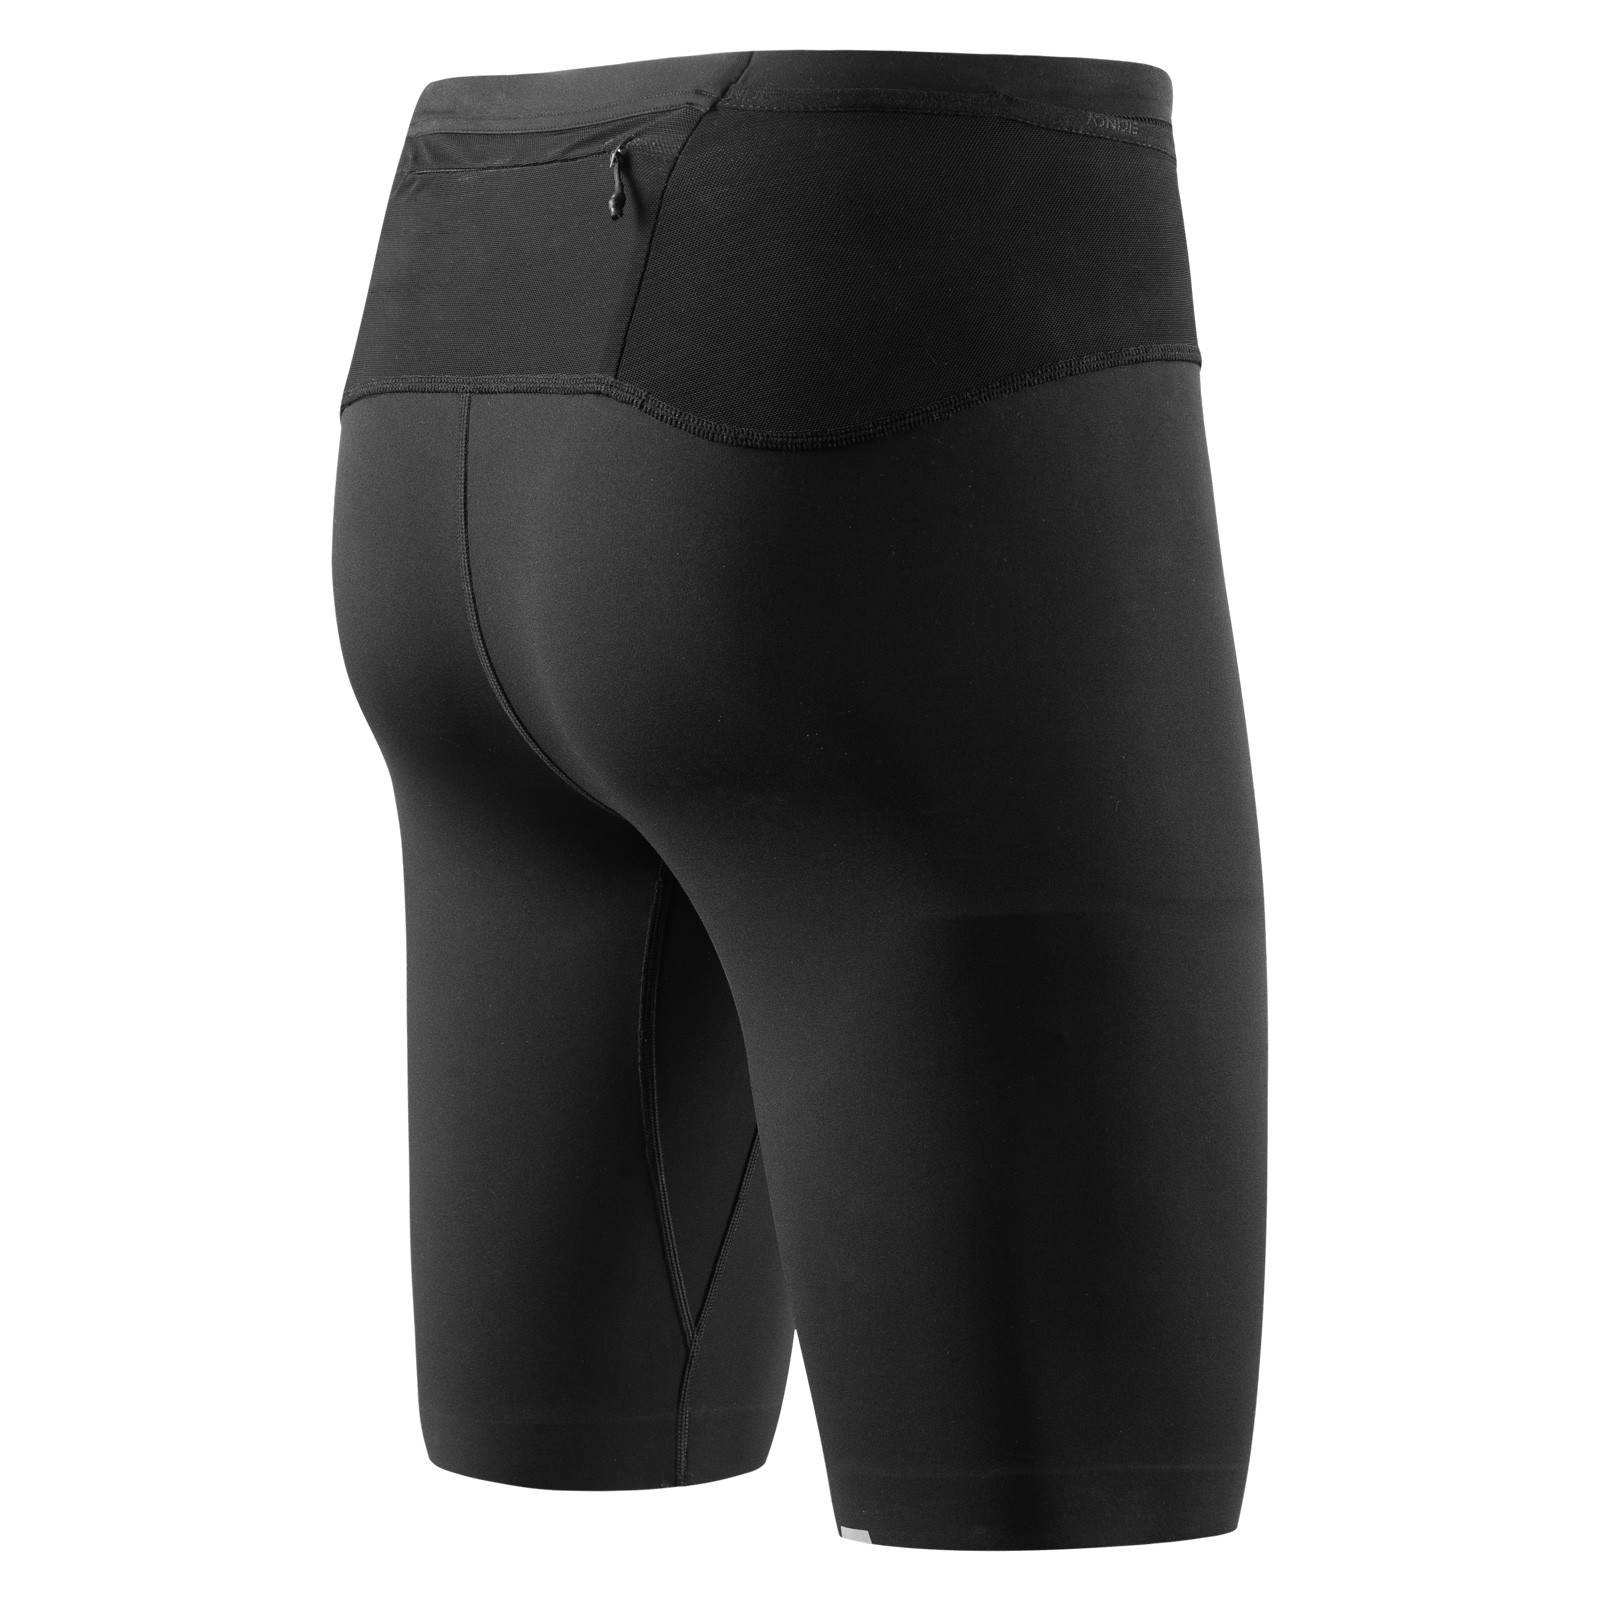 Buy WIRIST 2 in 1 Running Pants for Men, Tight Workout Compression